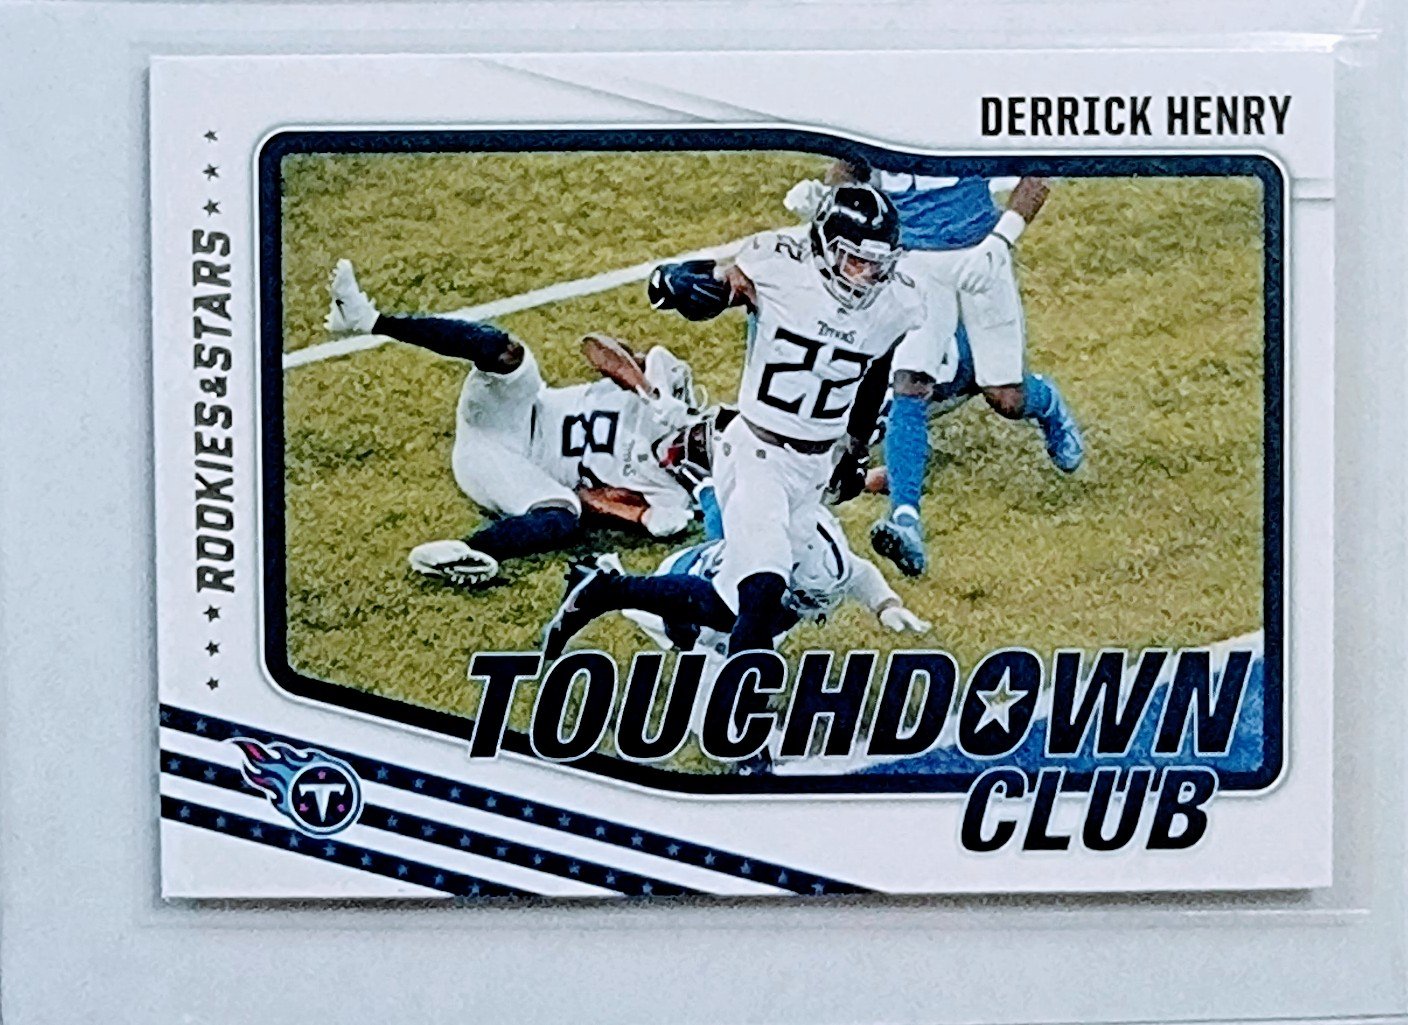 2021 Panini Rookies and Stars Derrick Henry Touchdown Club Insert Football Card AVM1 simple Xclusive Collectibles   